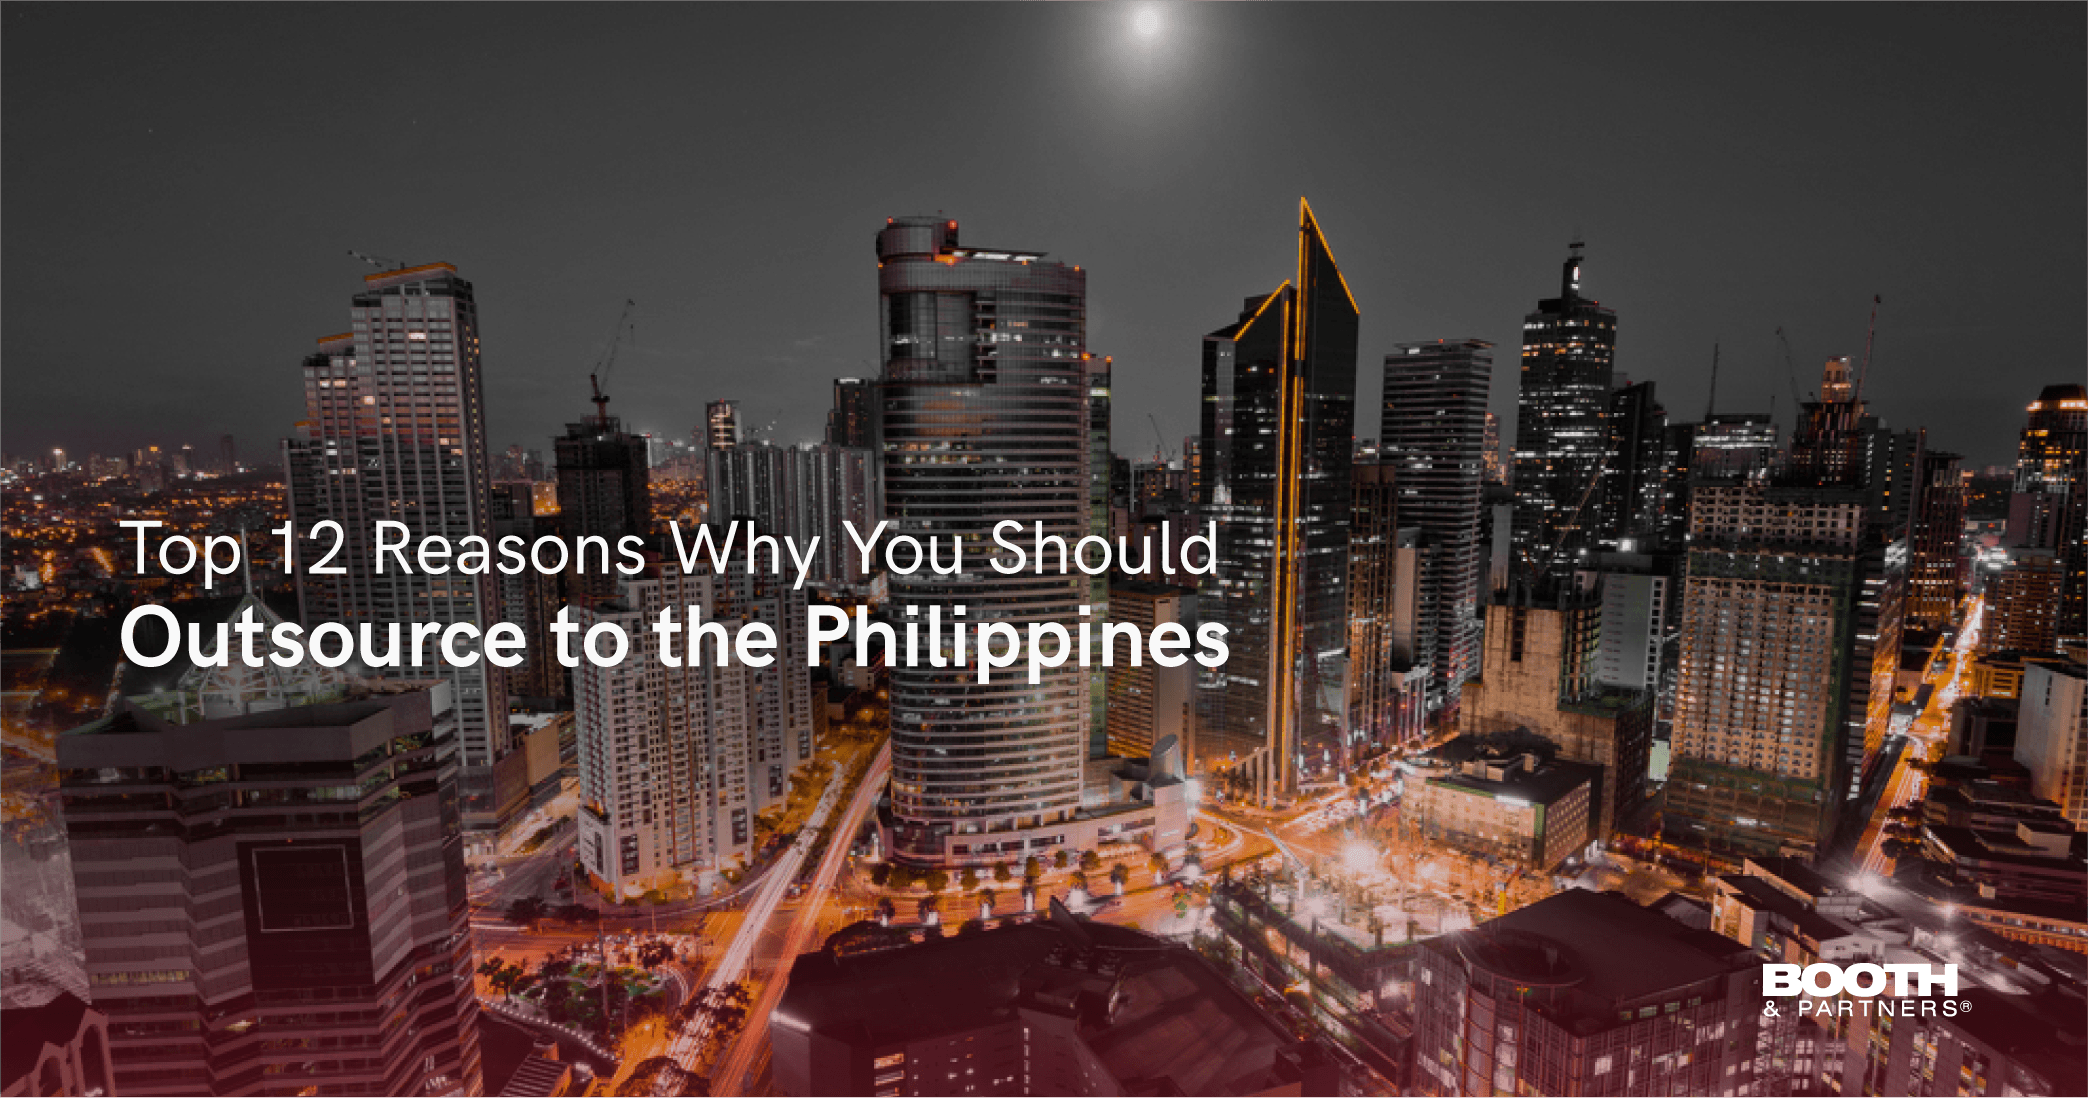 Top 12 Reasons Why You Should Outsource to the Philippines